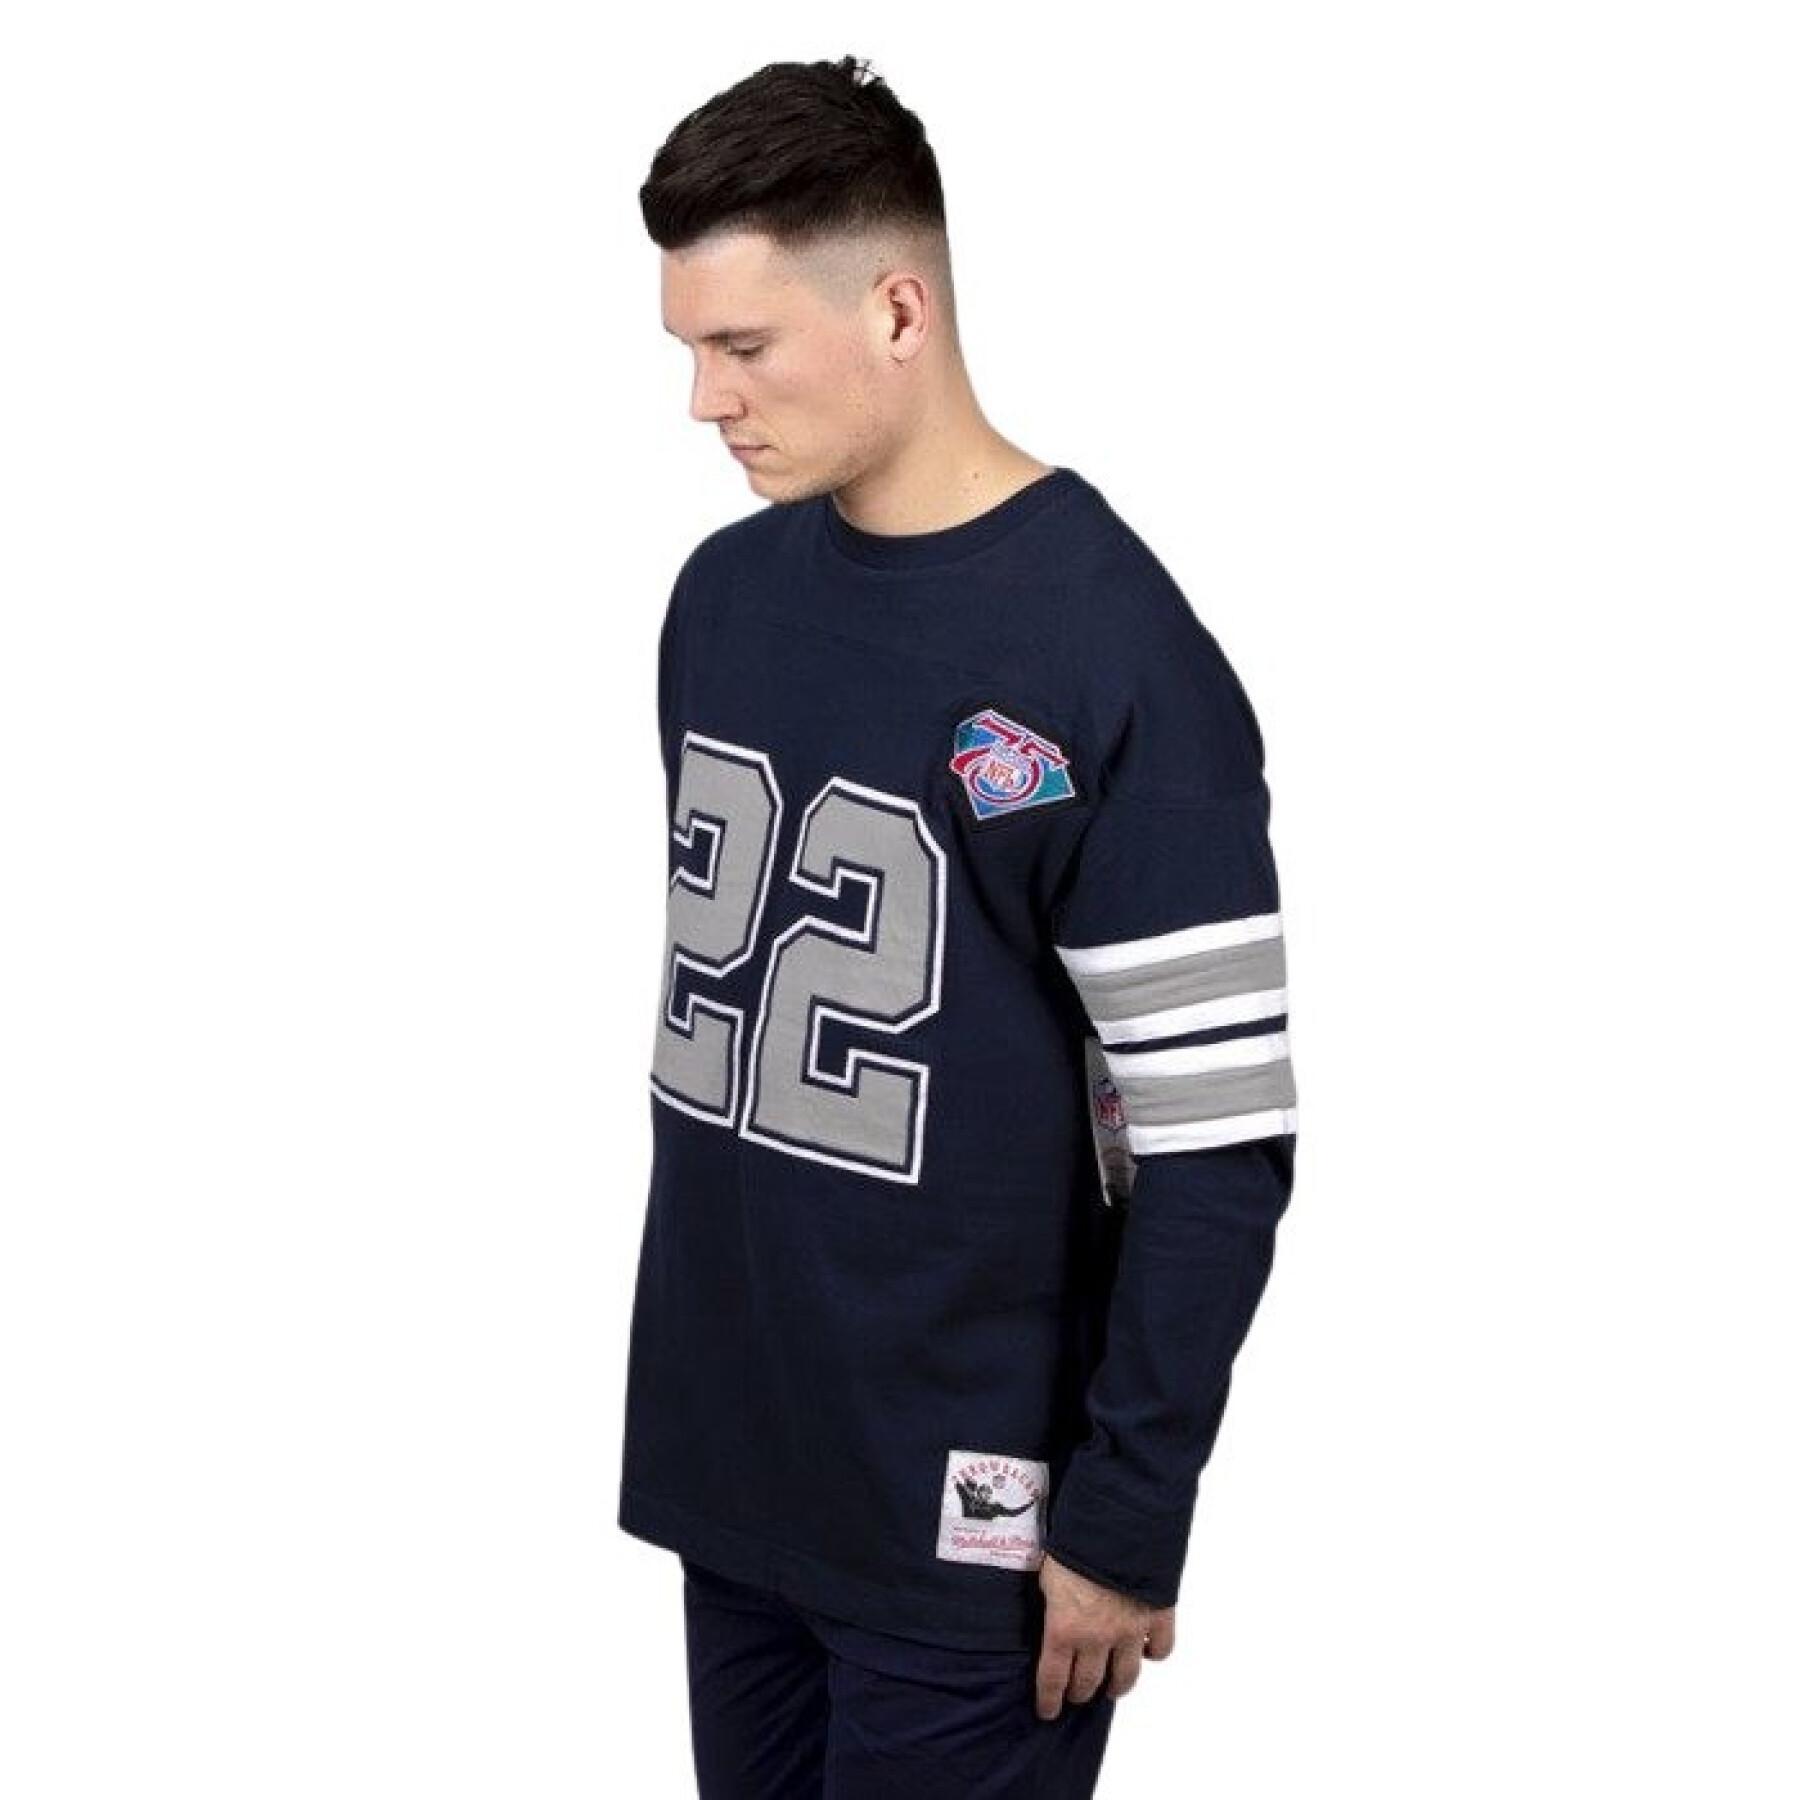 Long sleeve jersey Dallas Cowboys number